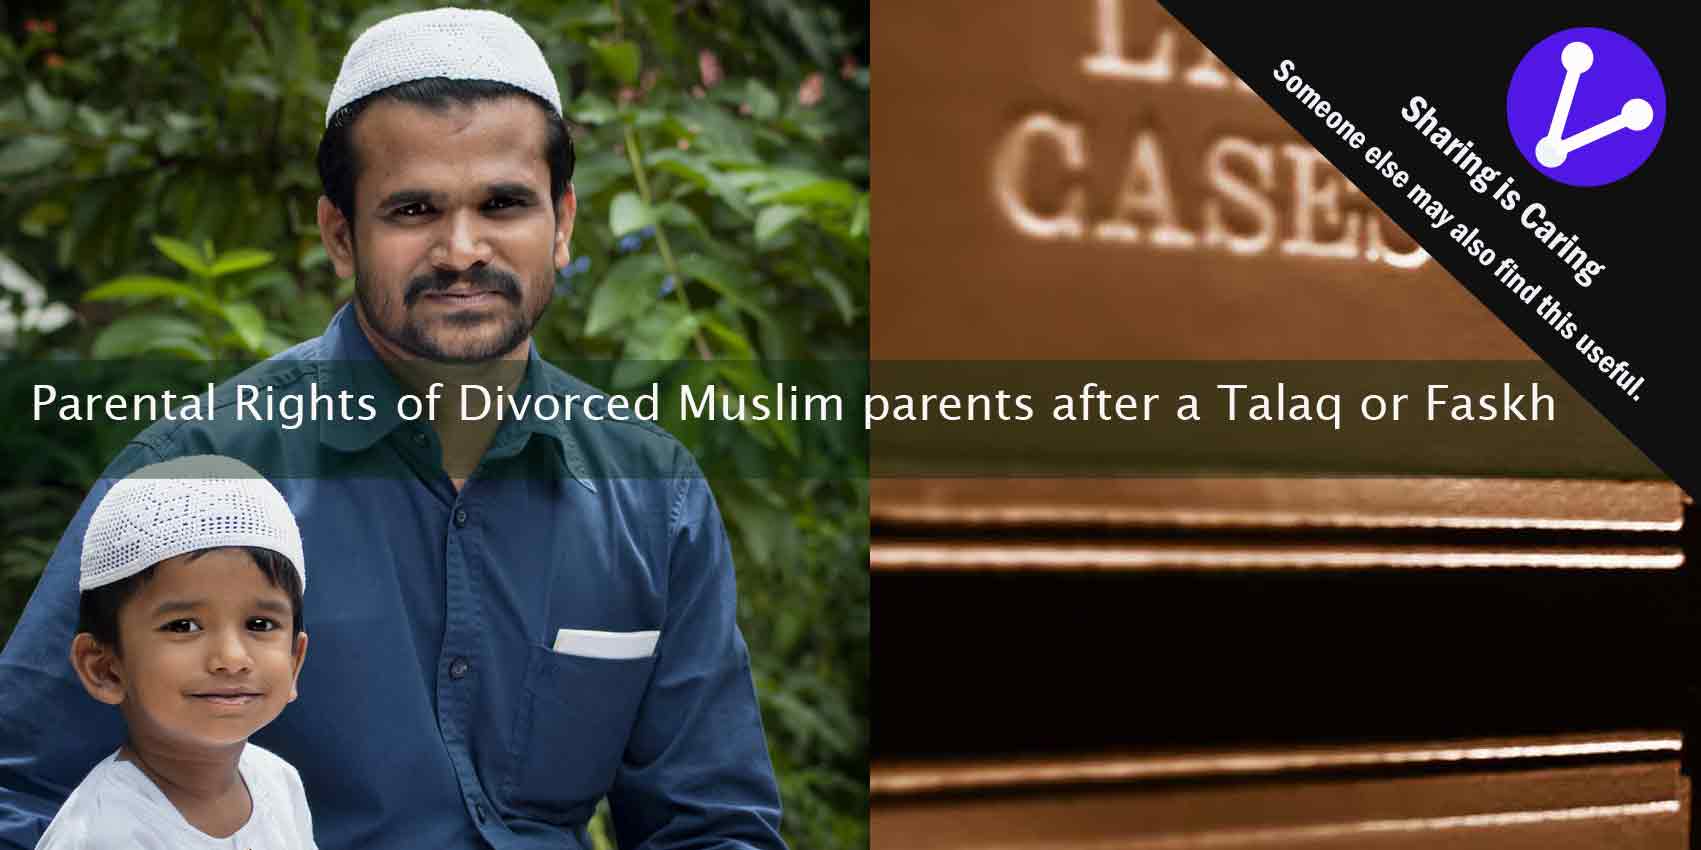 Parental Rights of Divorced Muslim parents after a Talaq or Faskh